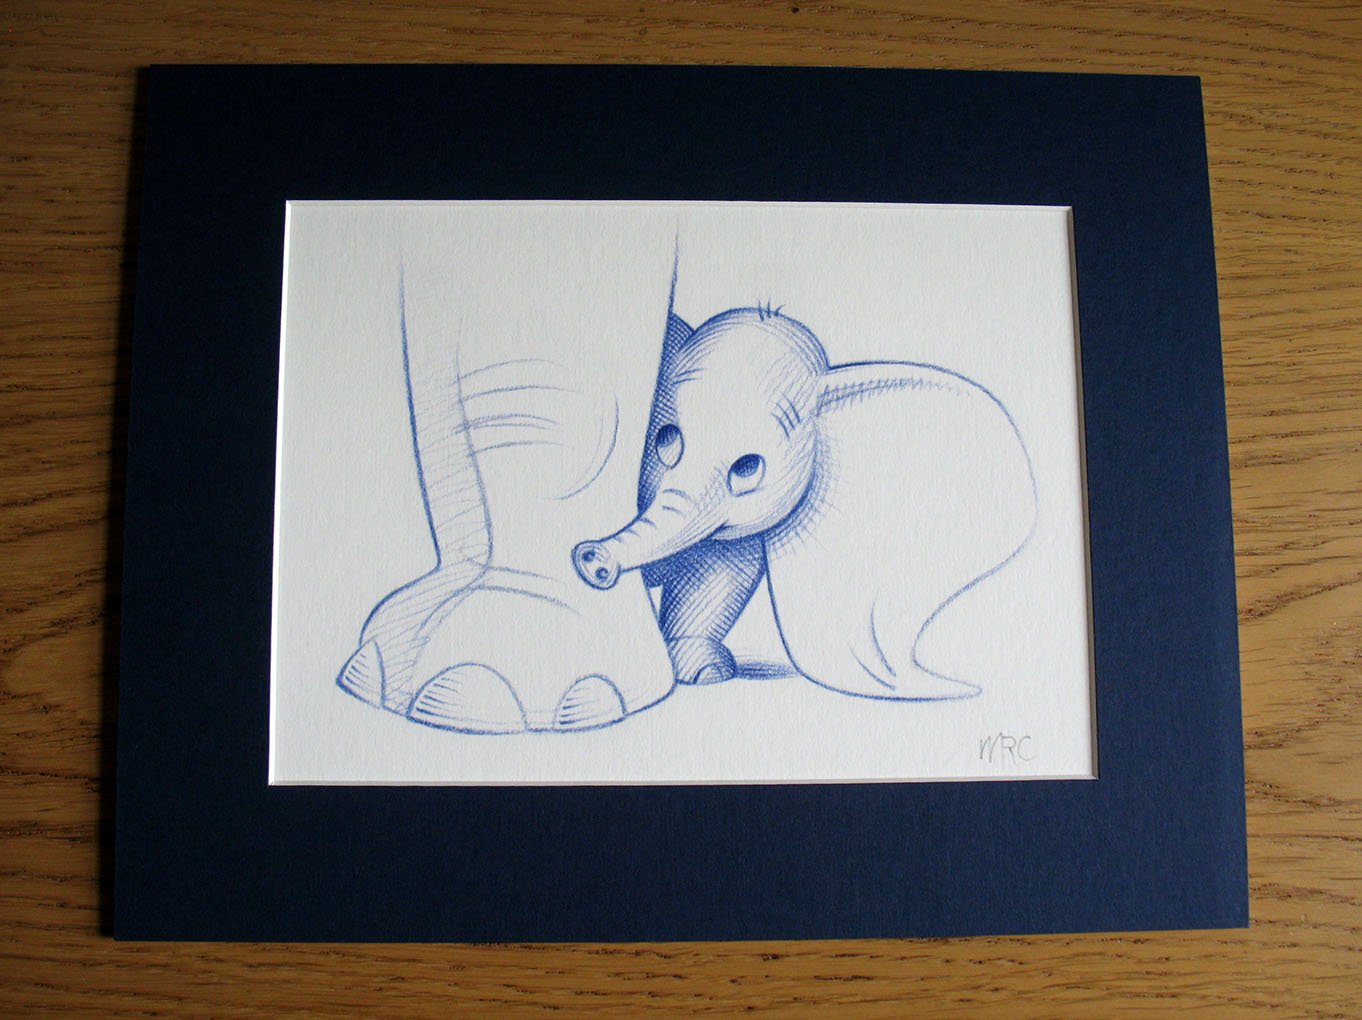 Classic Dumbo Disney style drawings - Golden Age inspired artwork